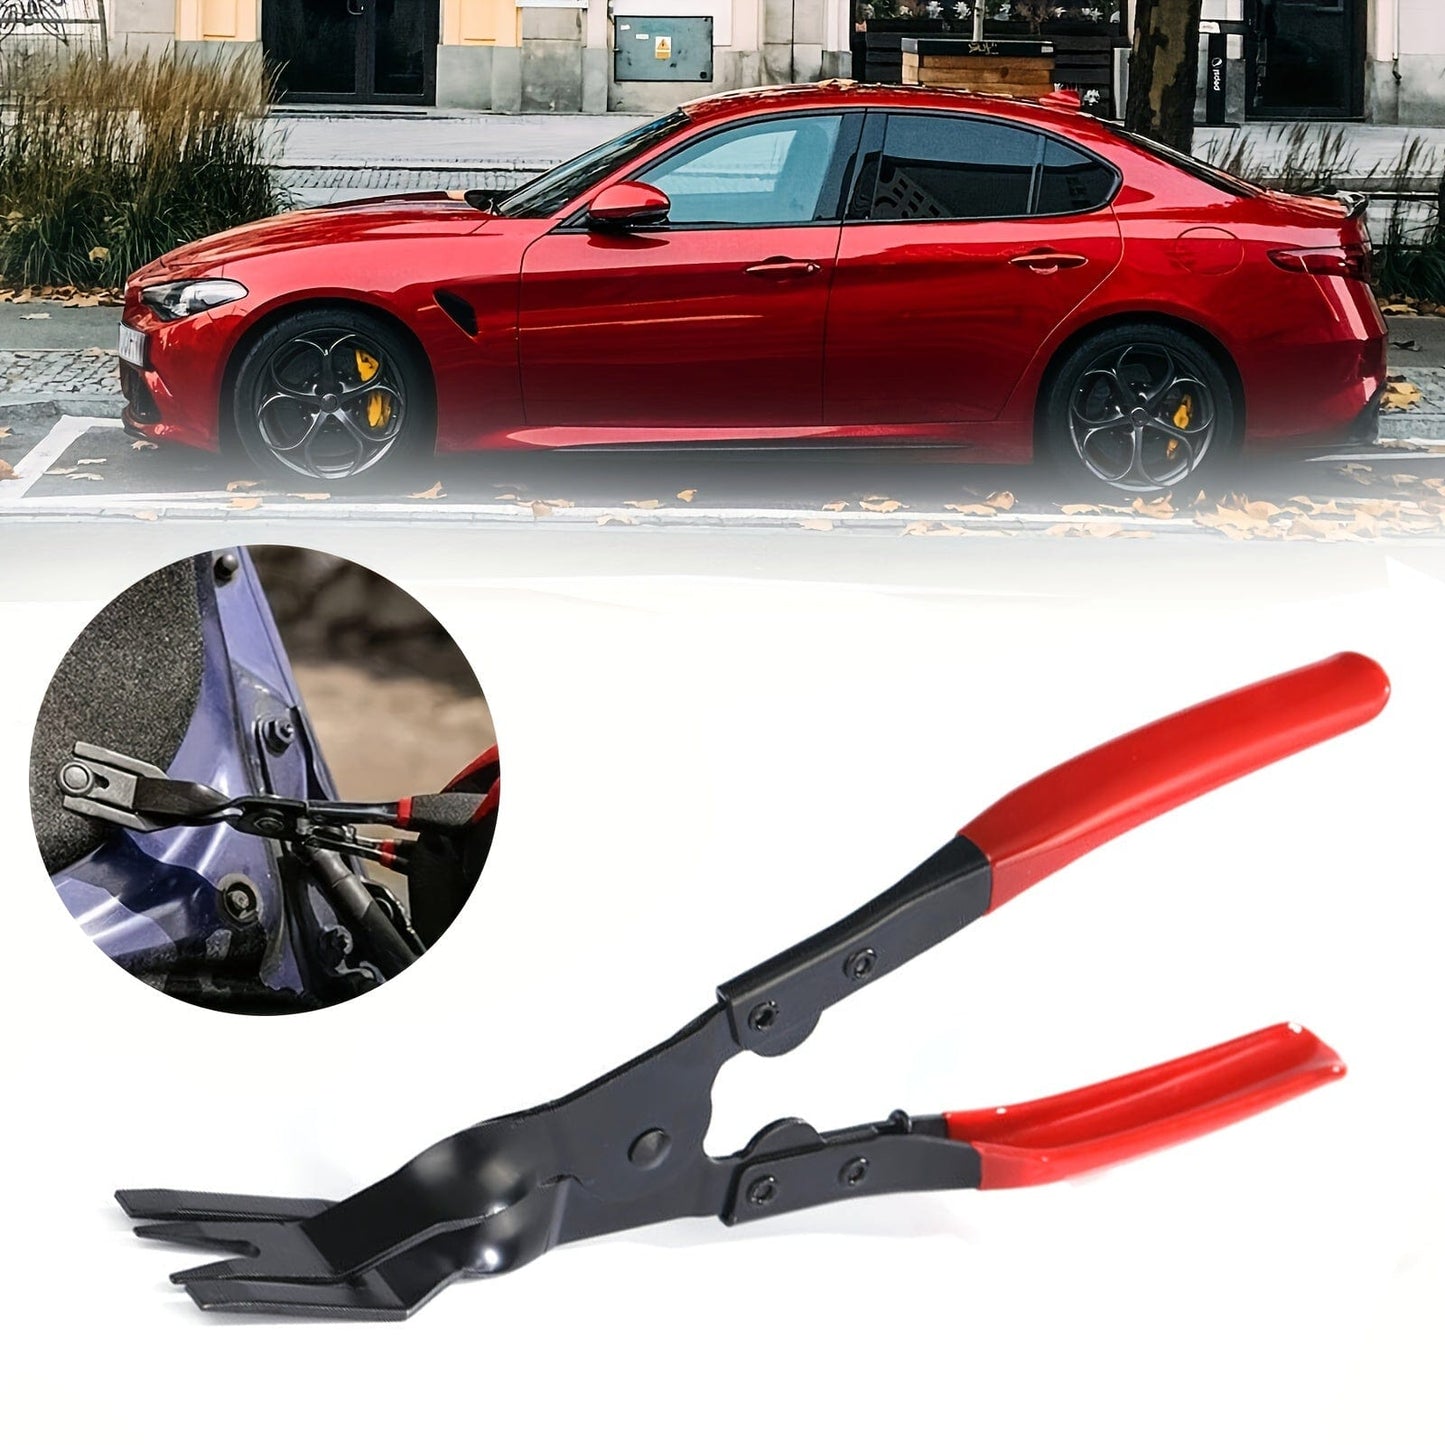 Upgrade Your Car with This Professional Plastic Rivet Snap Plier - Red Tool